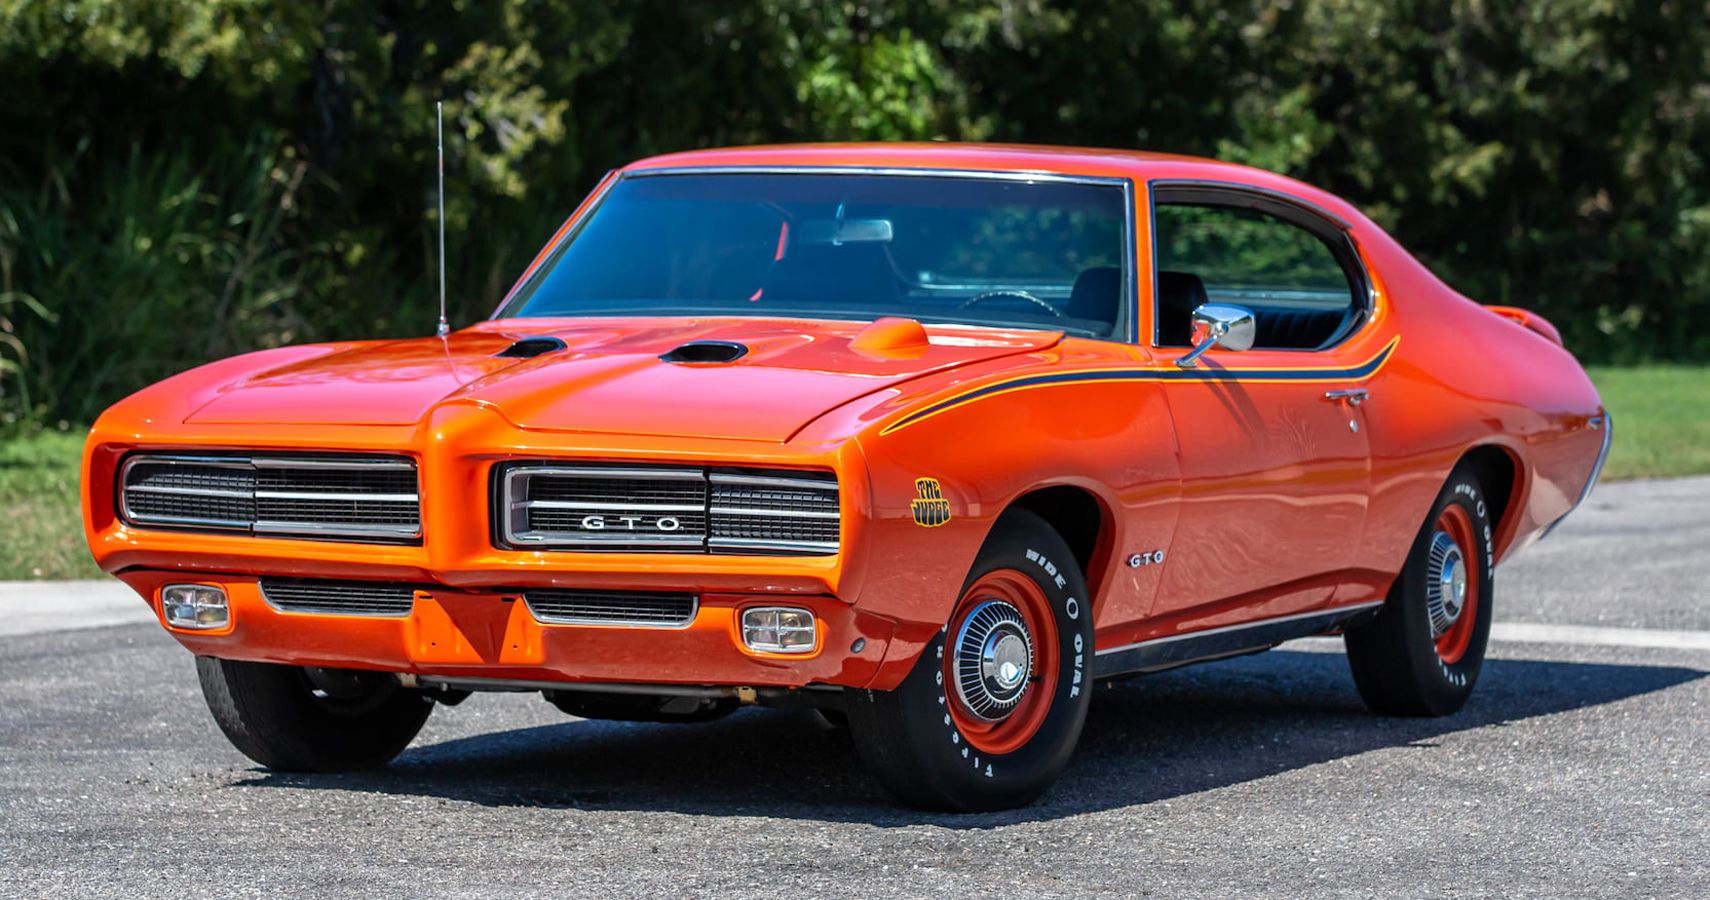 The Judge Was A Deliberate Move By Pontiac To Introduce A Bit Of Premier Feel To An Otherwise Good But Mid-Range Car, In A Bid To Drive Sales Up